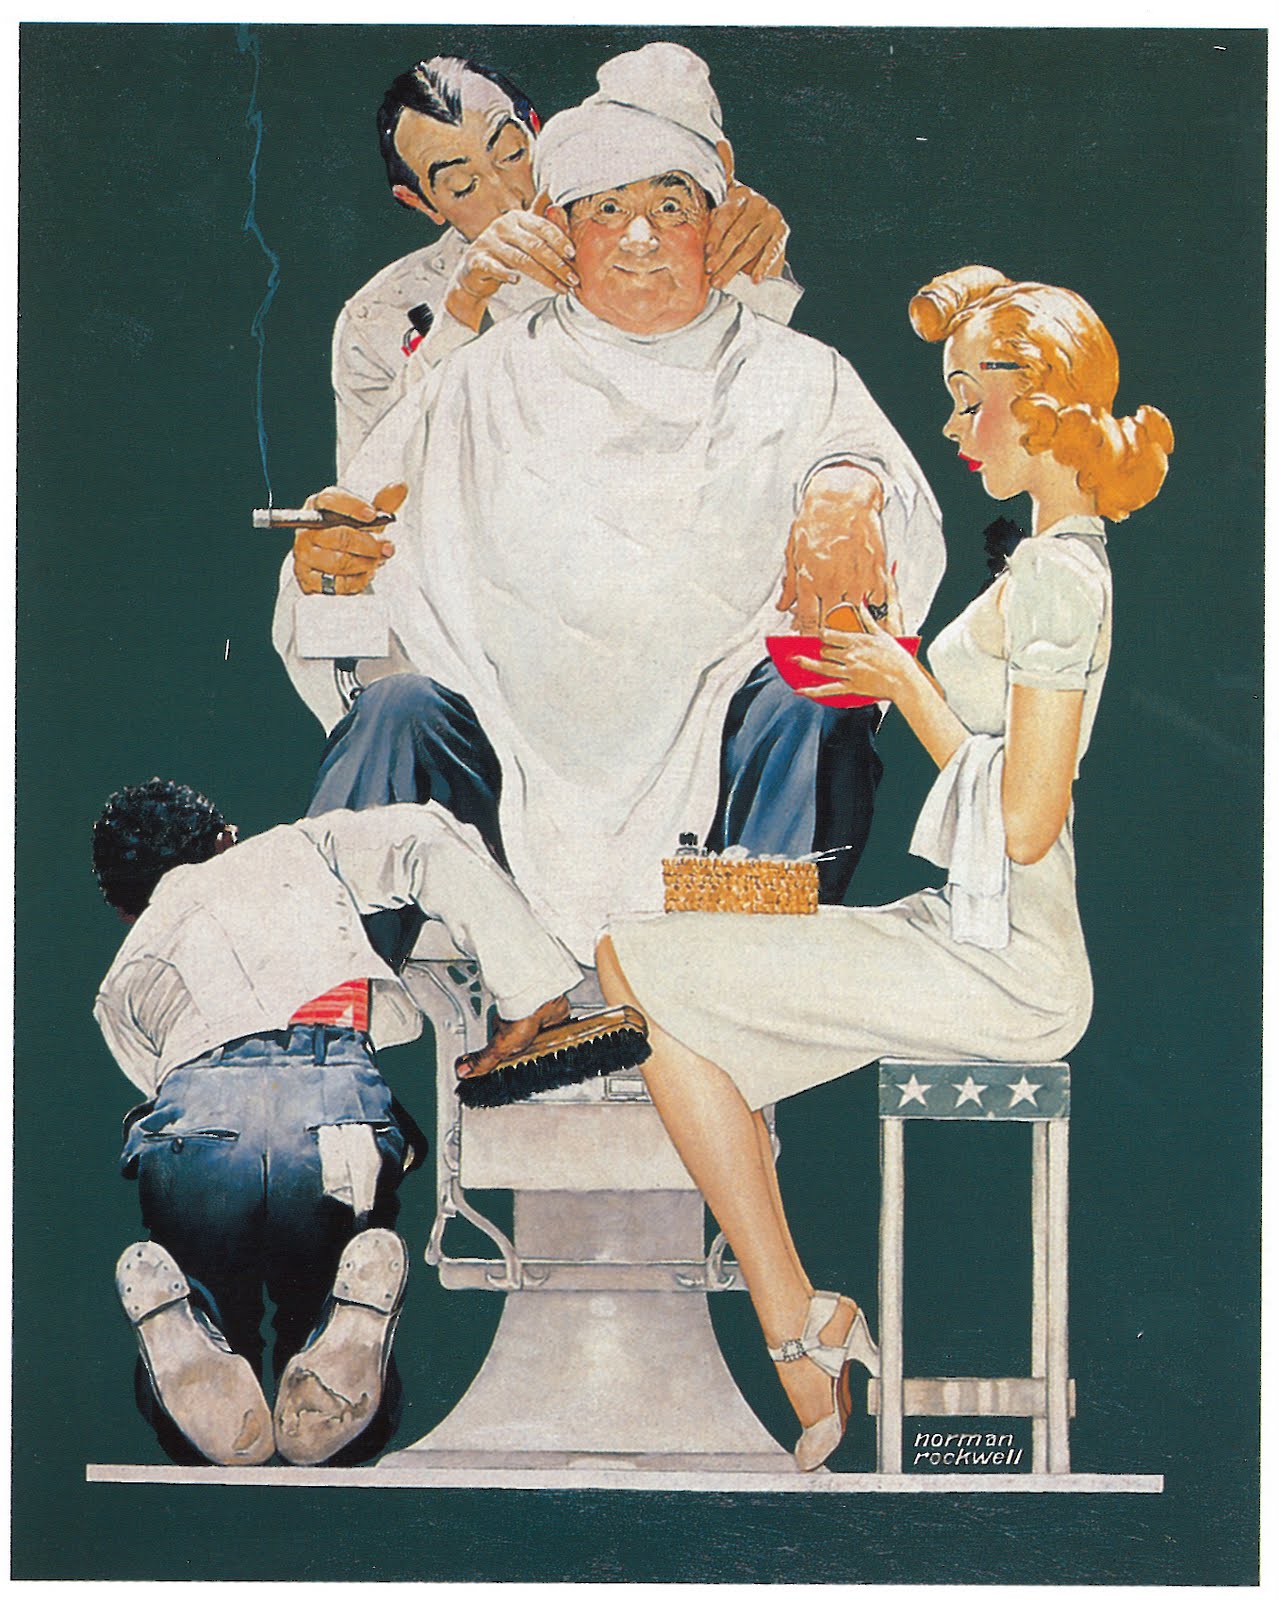 THE ART OF NORMAN ROCKWELL